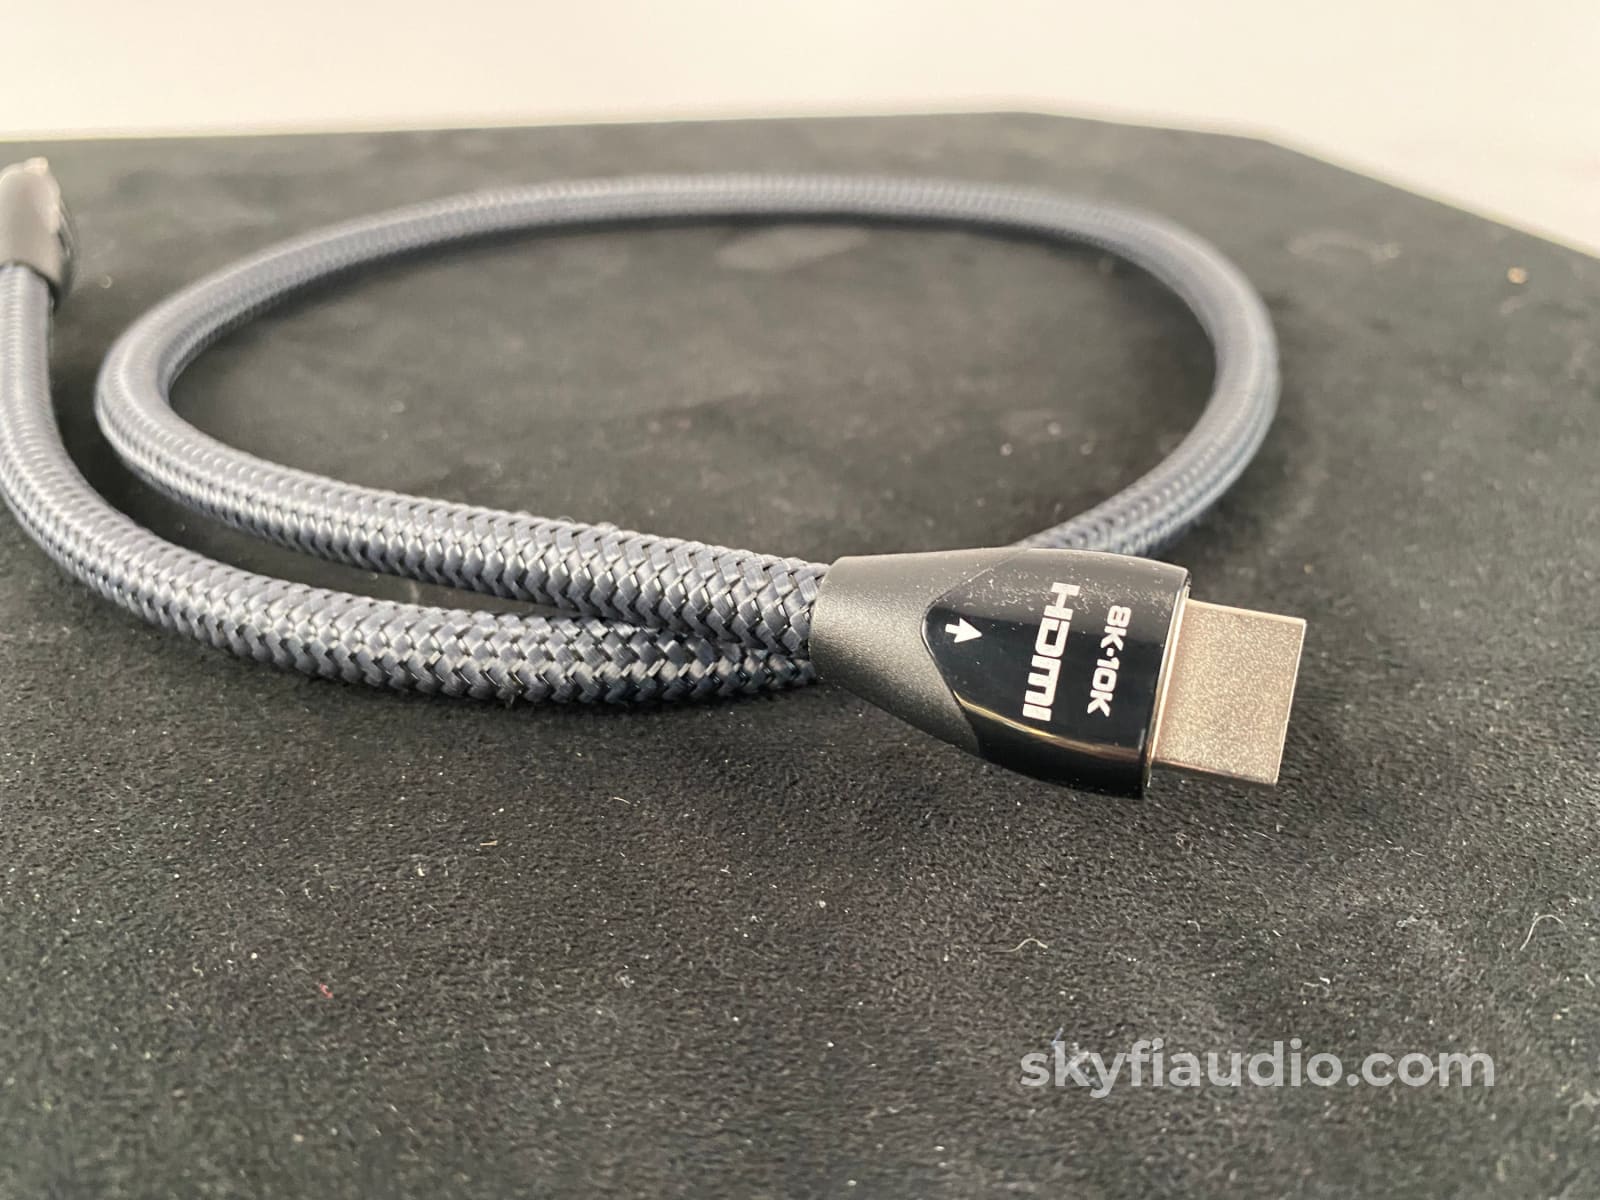 http://skyfiaudio.com/cdn/shop/files/audioquest-carbon-48-hdmi-cable-gbps-bandwidth-10k-and-hi-res-audio-capable-0-75-meter-length-cables-949.jpg?v=1682630051&width=2048